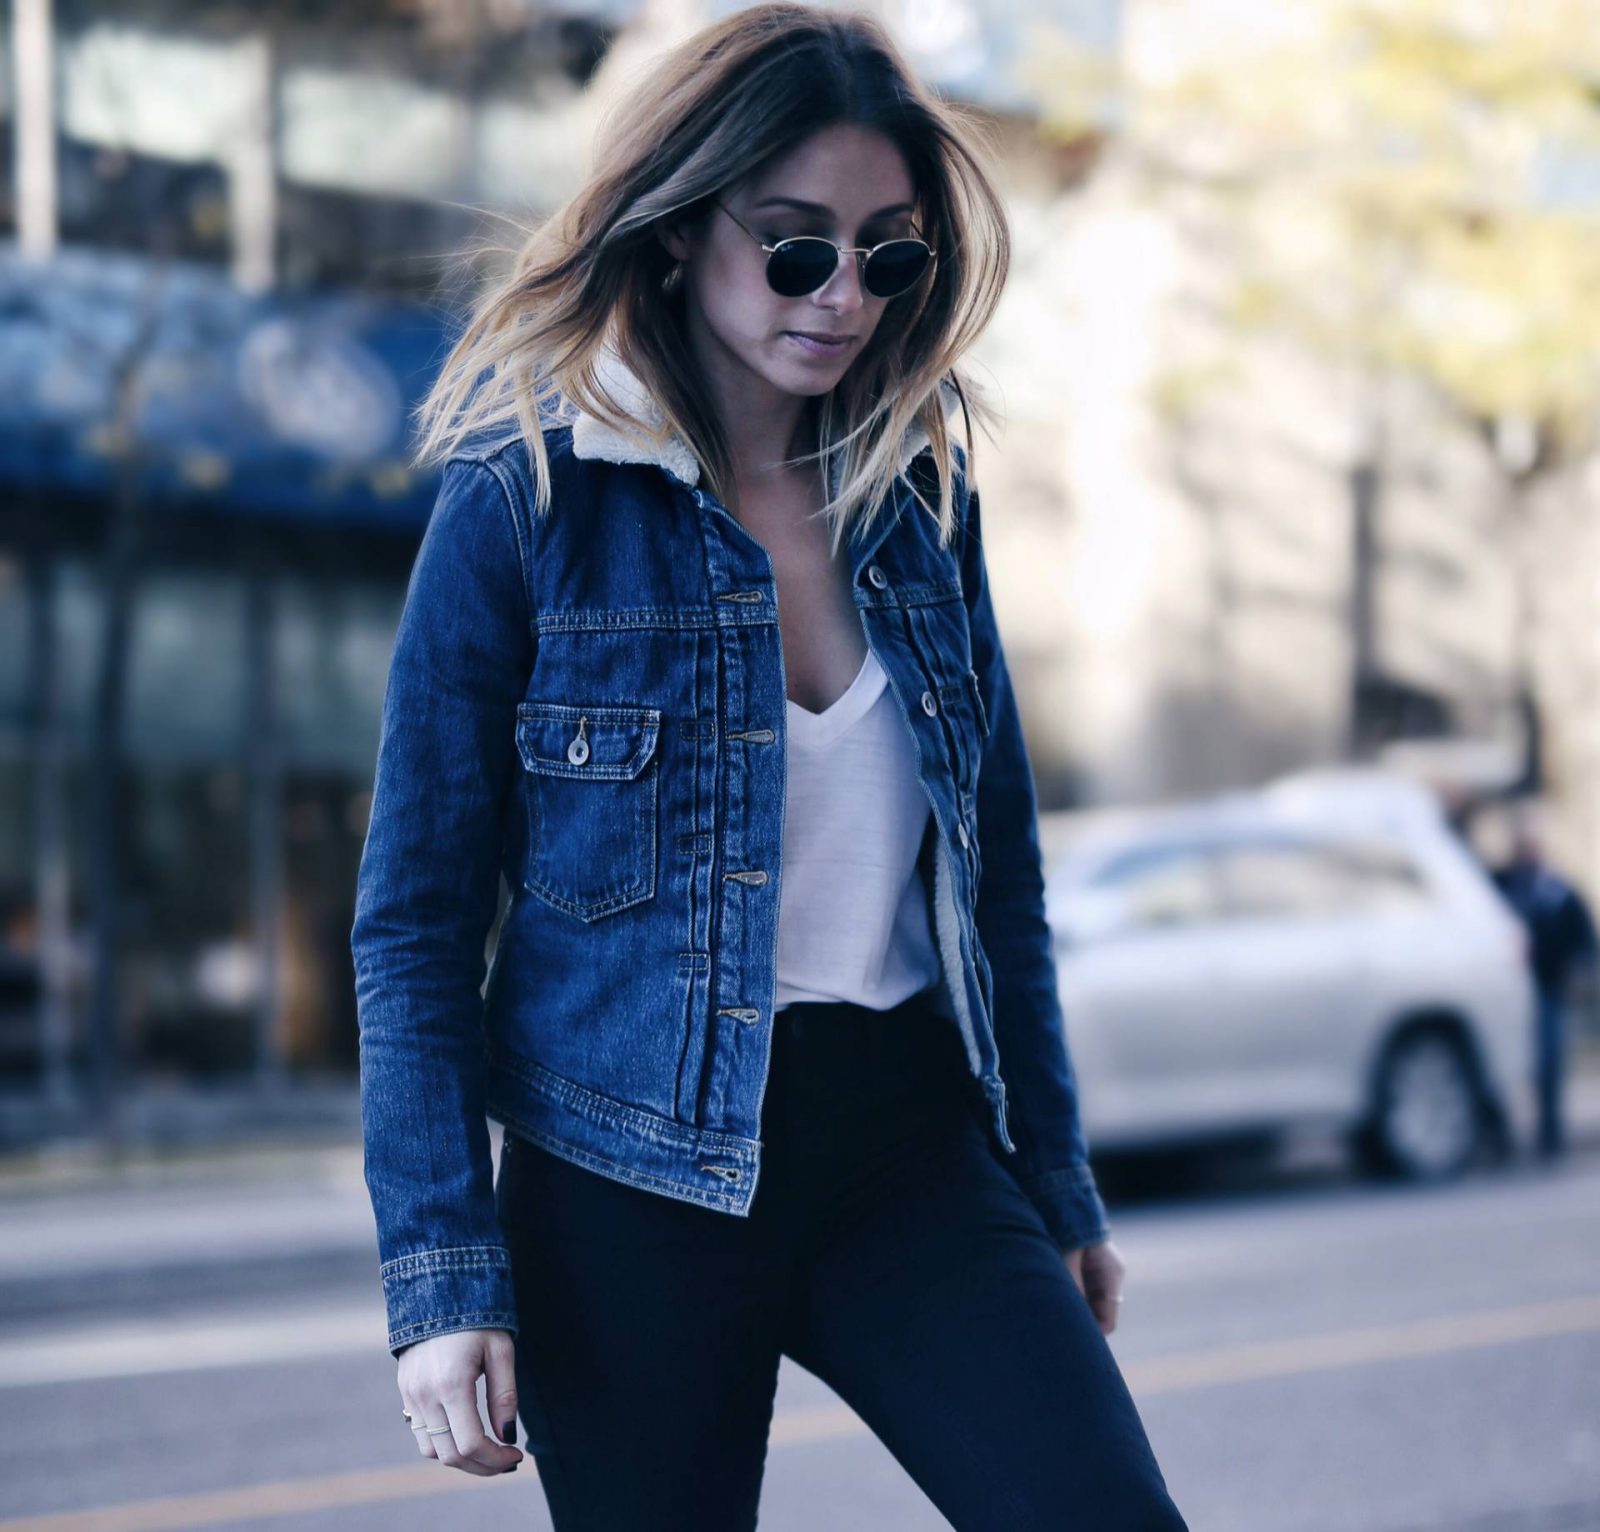 HOW TO WEAR A SHEARLING DENIM JACKET